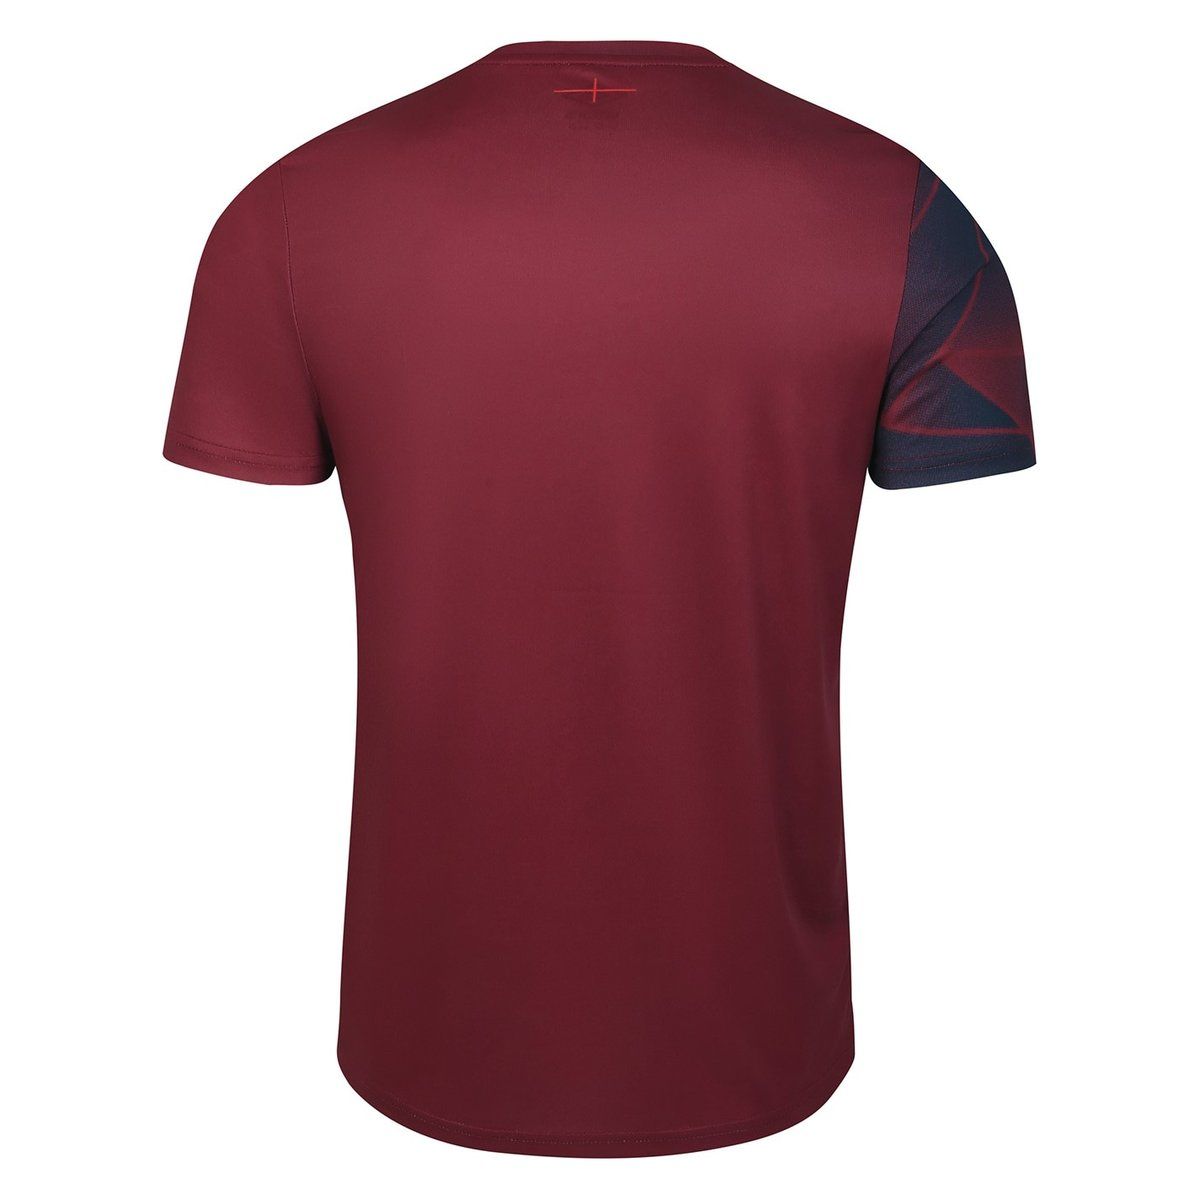 Umbro England Rugby Warm Up Shirt 2023 2024 Adults Red/Navy, £45.00